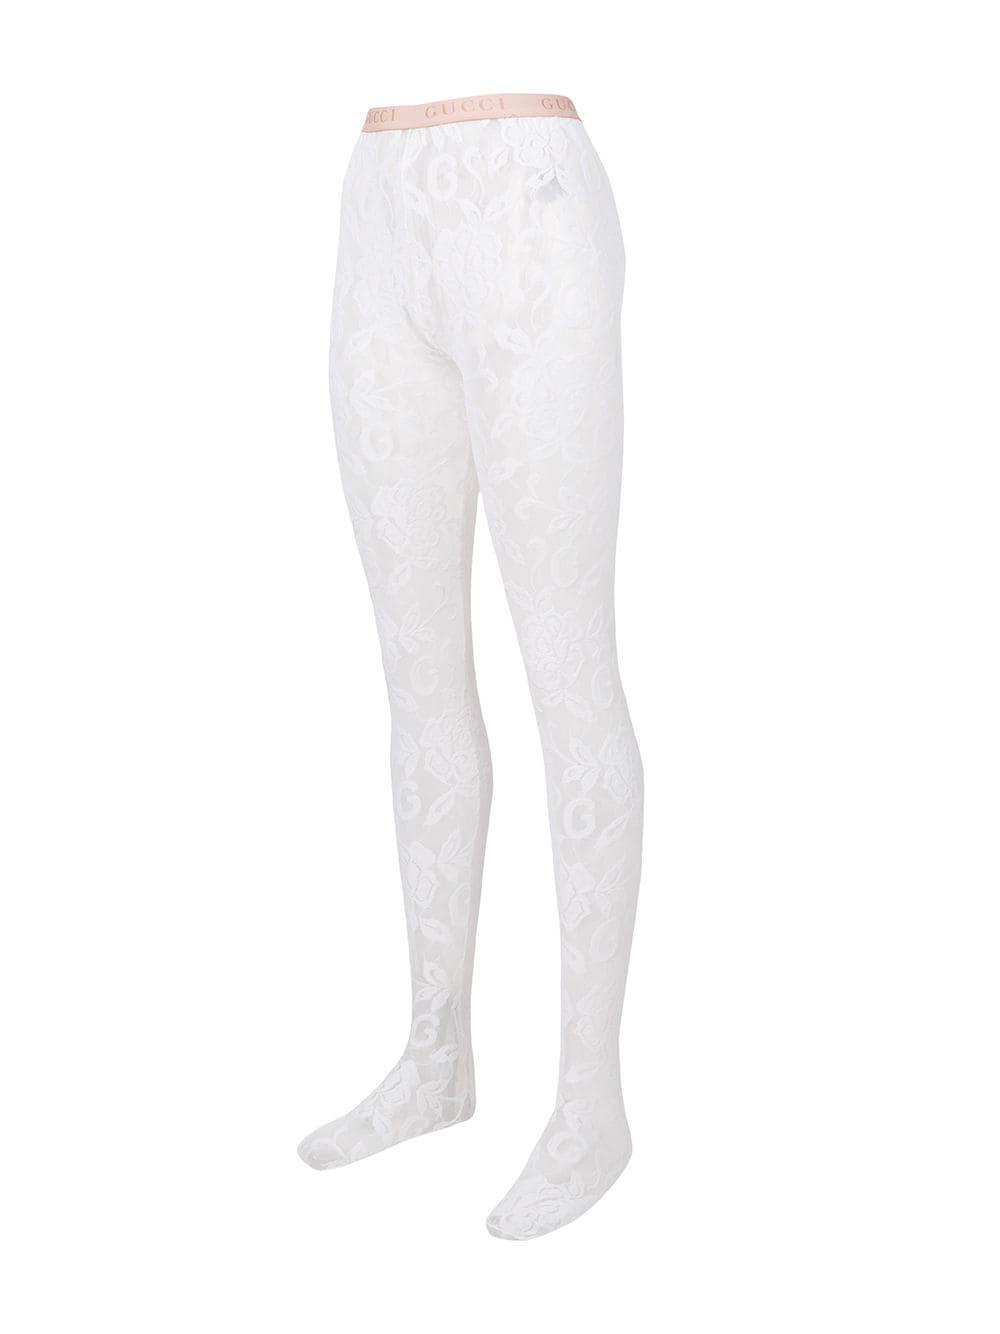 Gucci Floral Lace Tights in White | Lyst